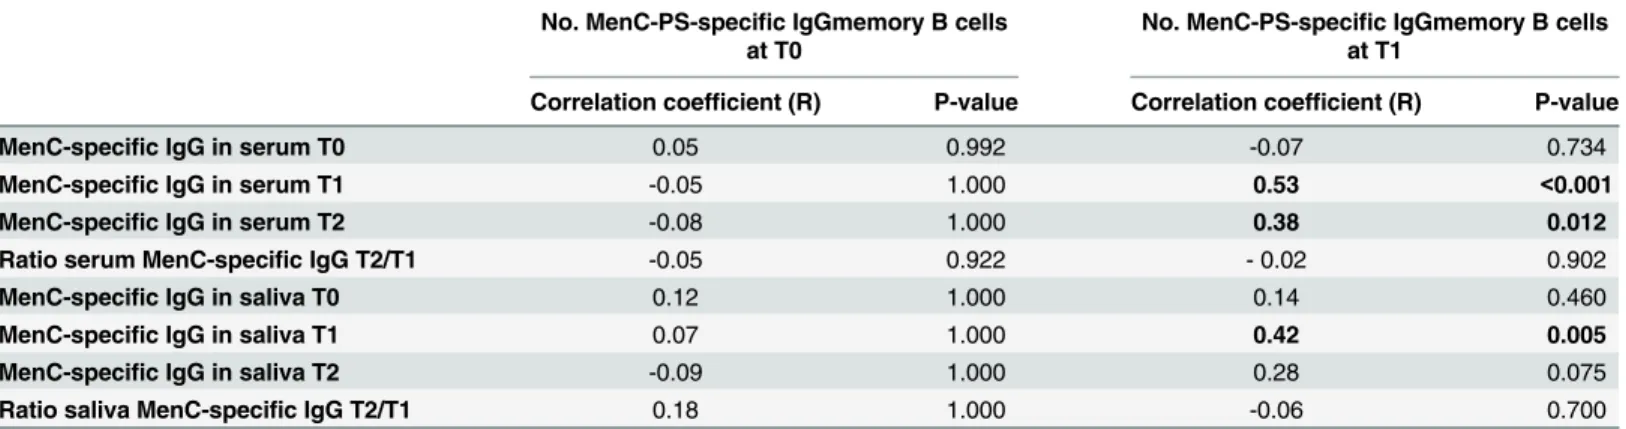 Table 3. Correlation between number of MenC-PS-specific IgA memory B cells and MenC-PS-specific IgA levels at different time points during the study.